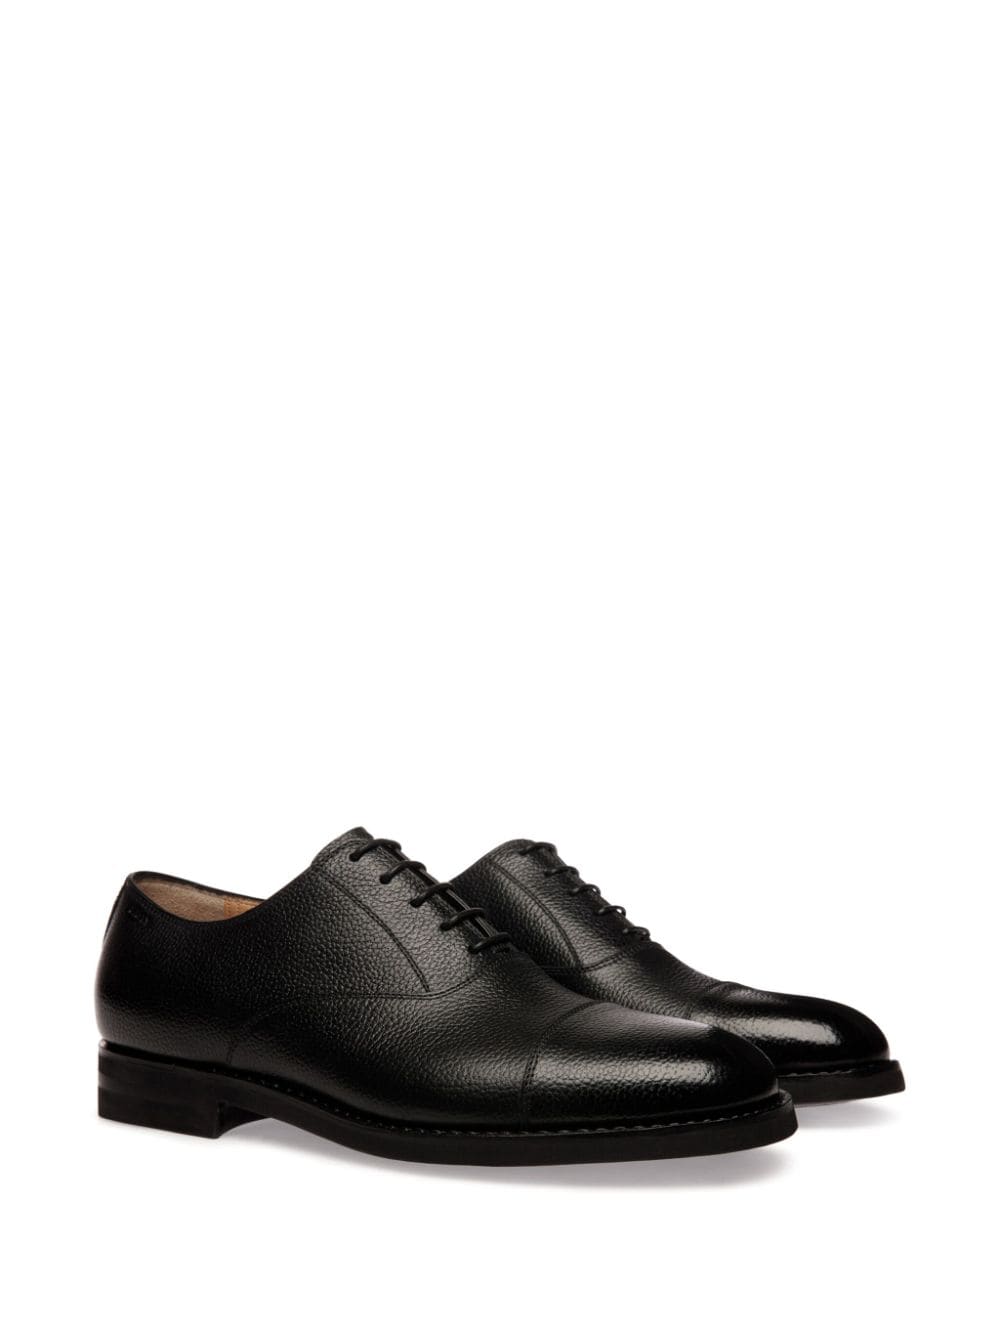 Bally leather Oxford shoes - Zwart